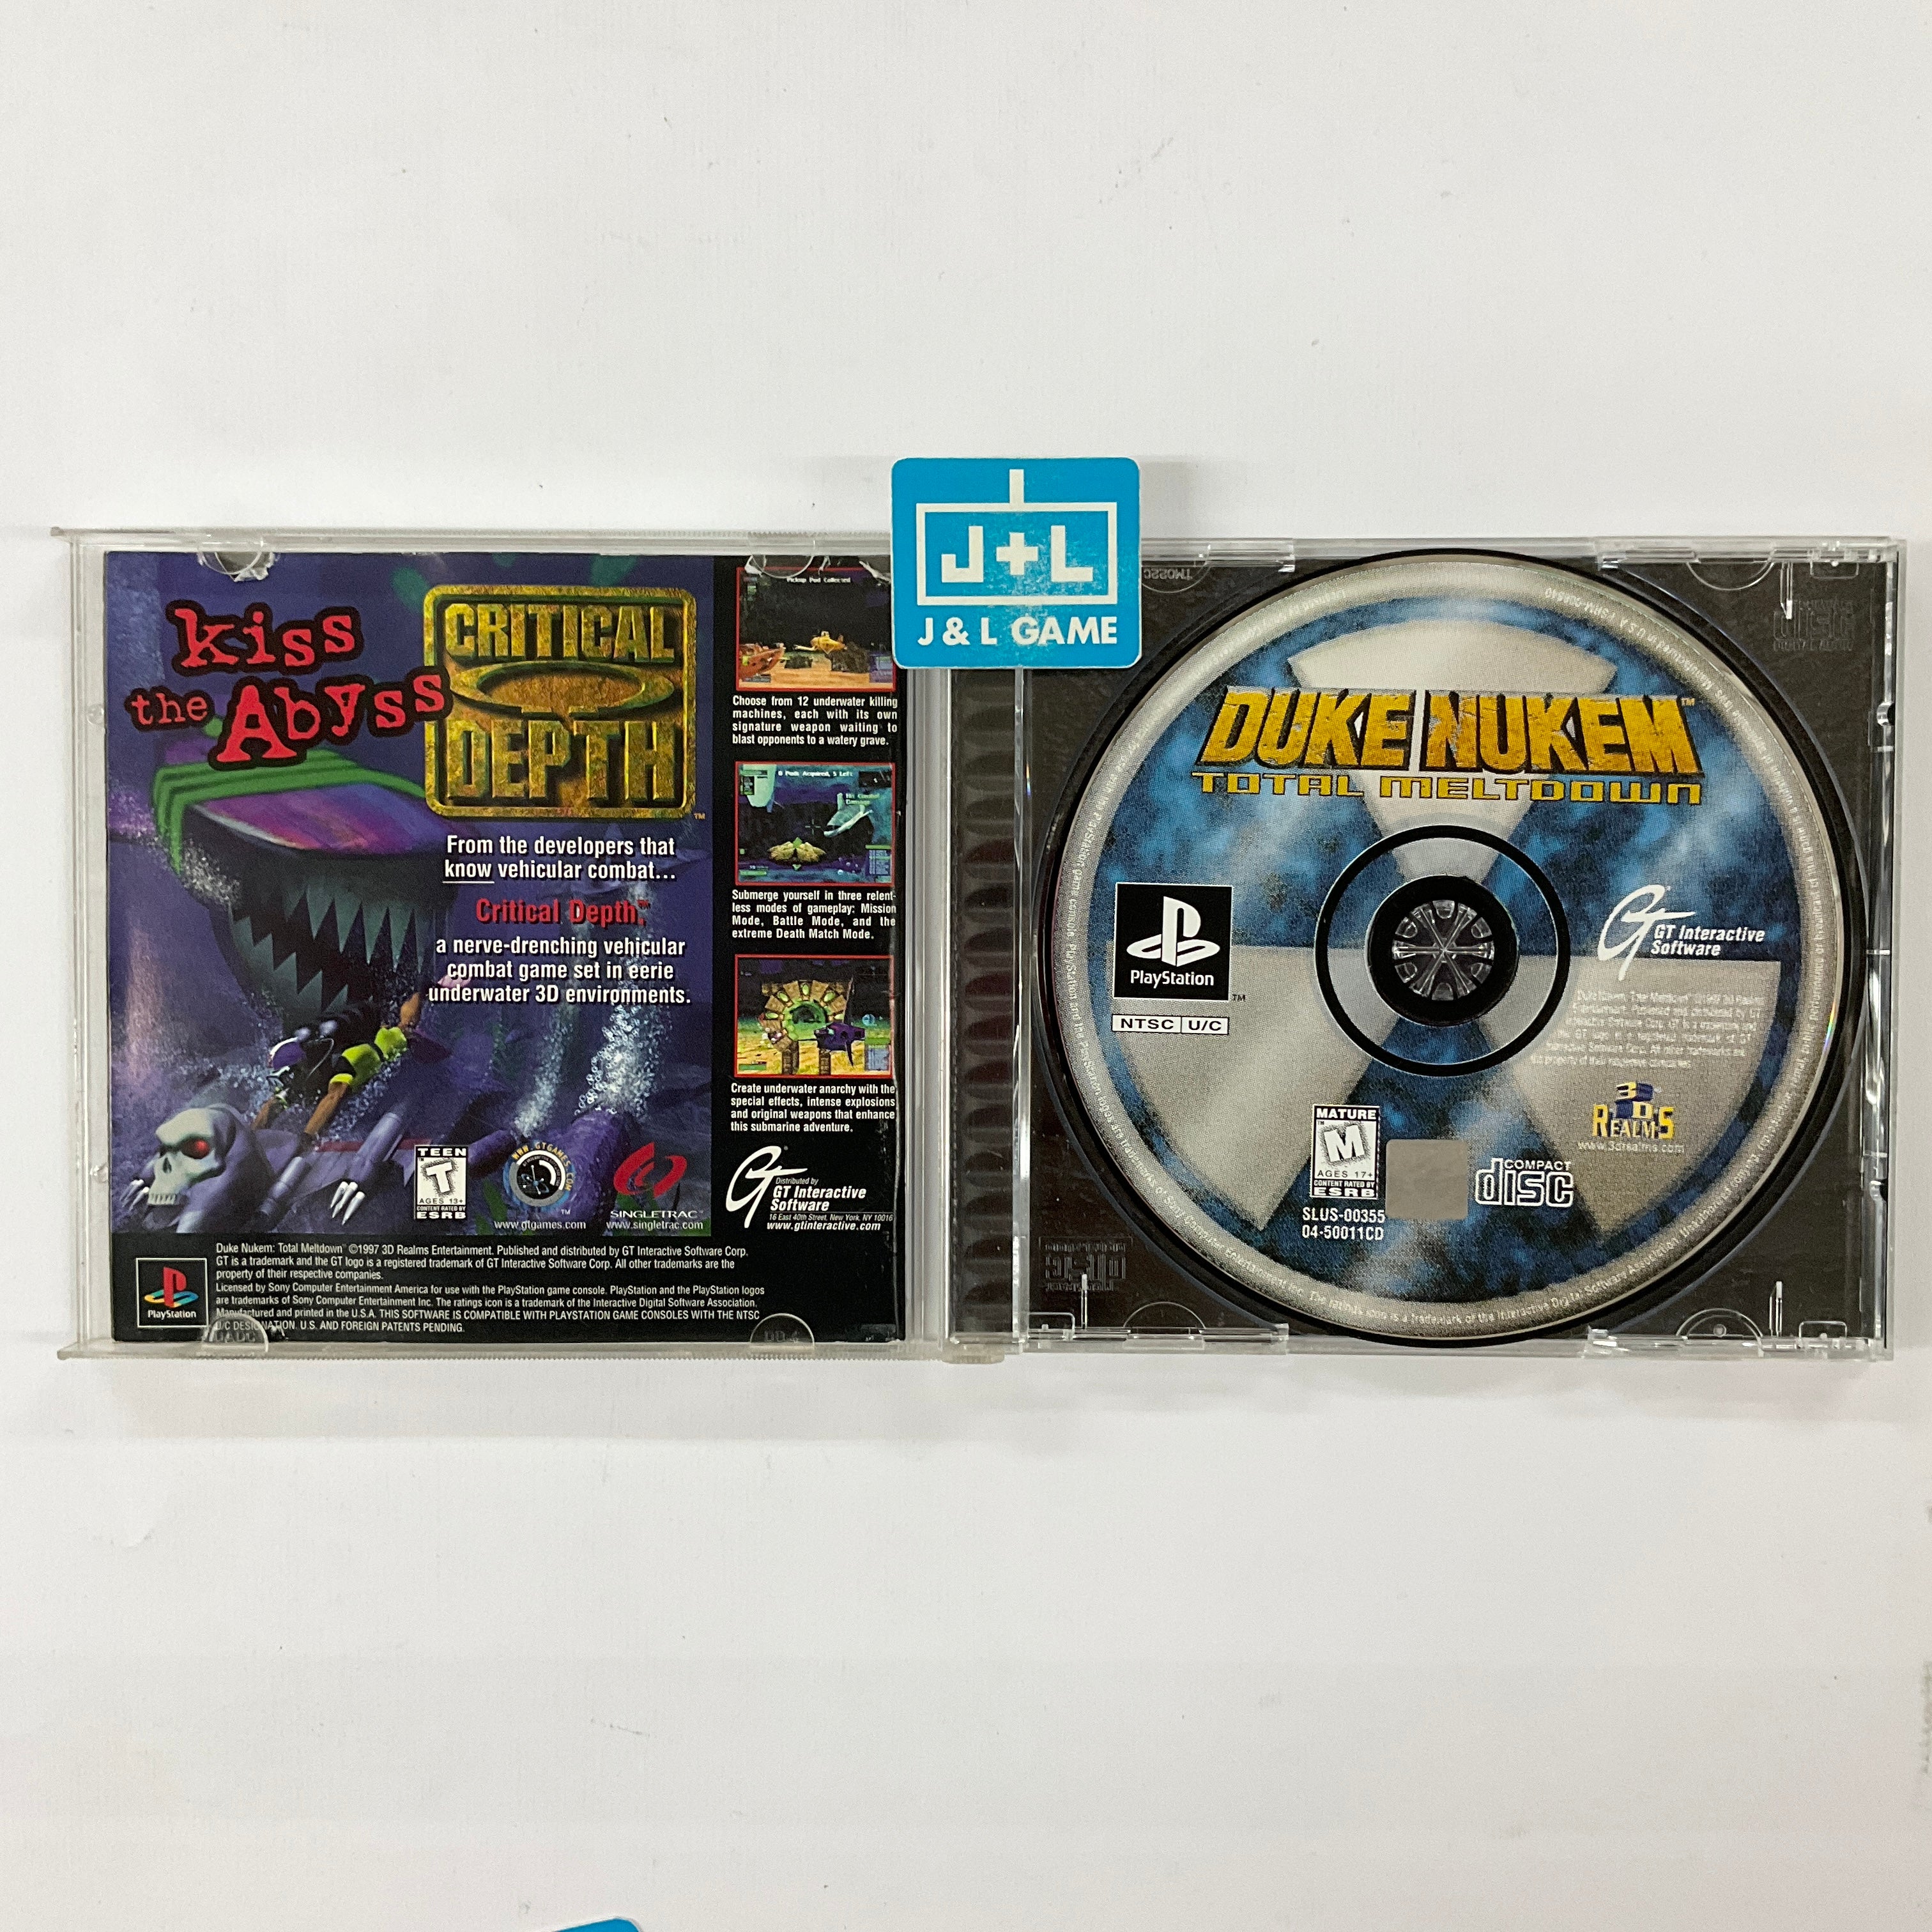 Duke Nukem: Total Meltdown - (PS1) PlayStation 1 [Pre-Owned] Video Games GT Interactive   